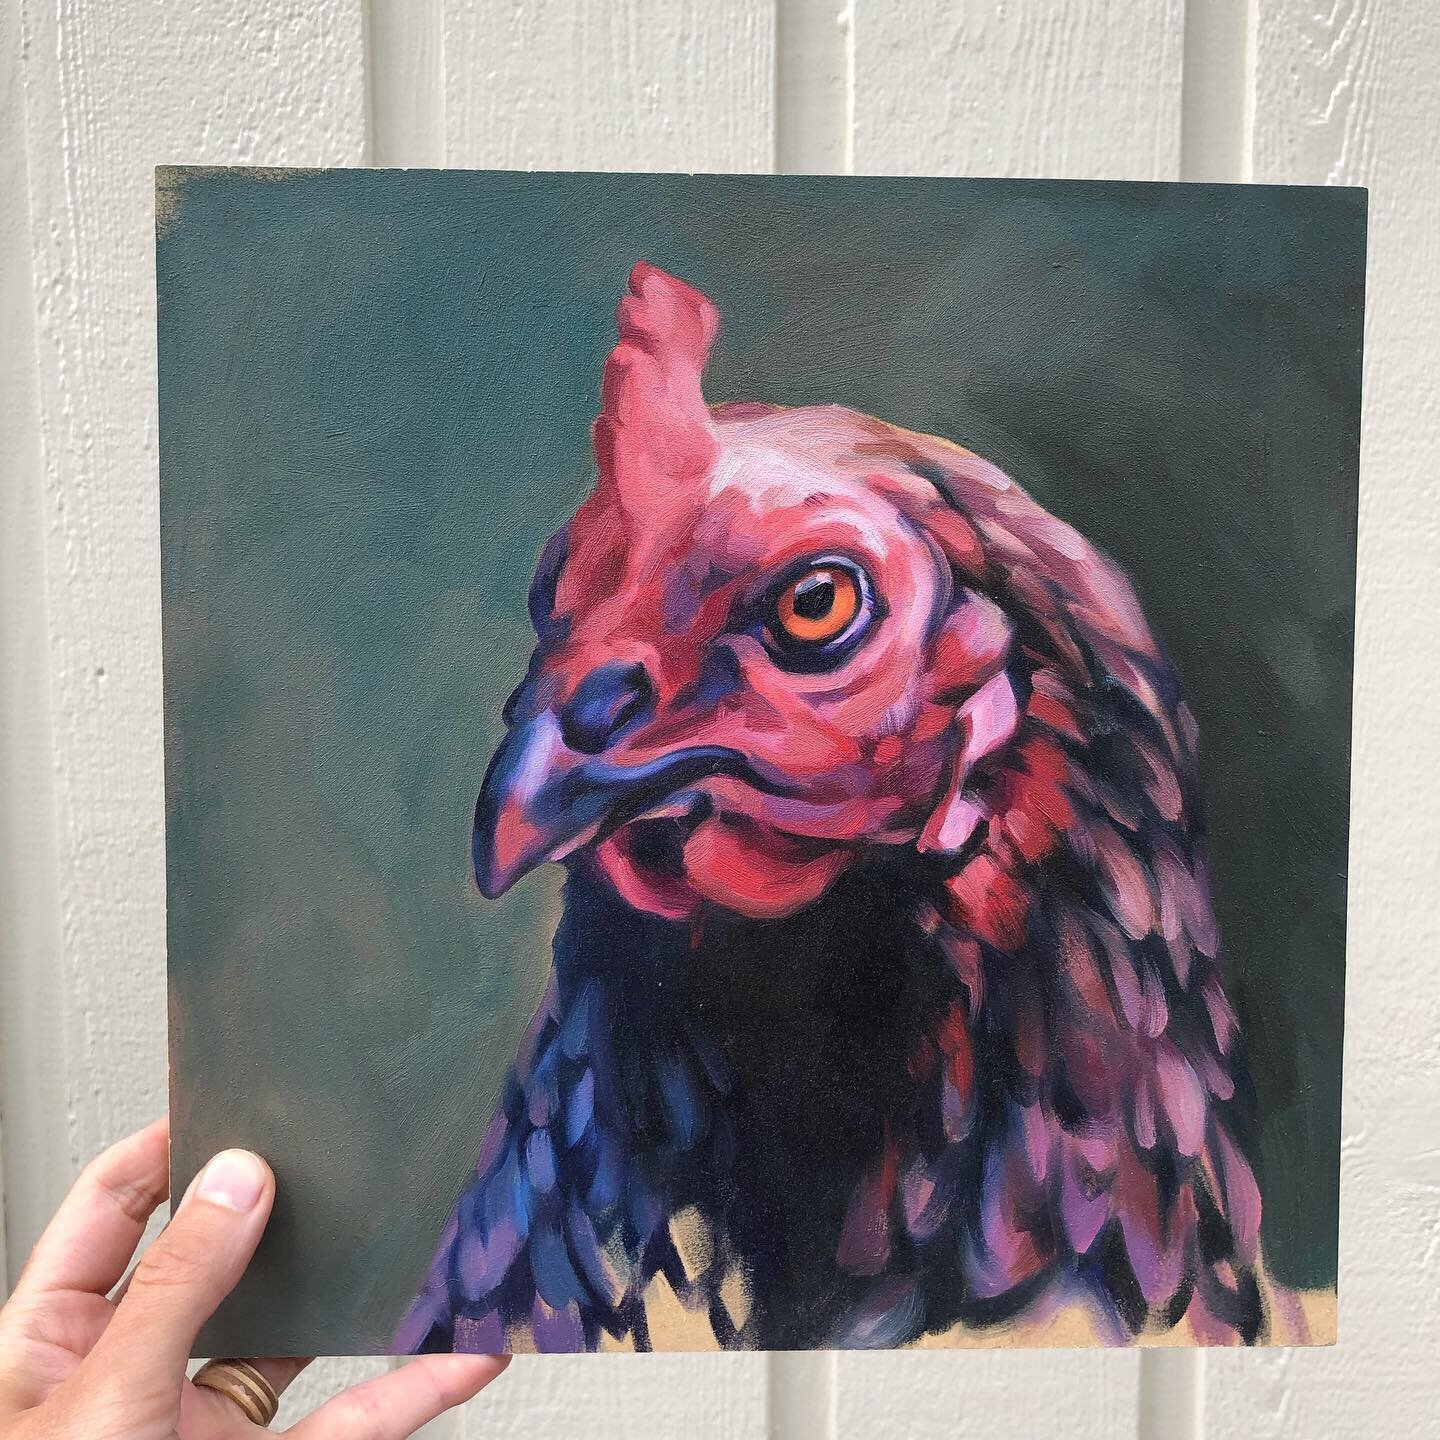 Every kitchen needs an angry chicken to remind guests who&rsquo;s in charge. 

Https://www.stanleycaroline.com/studies/15